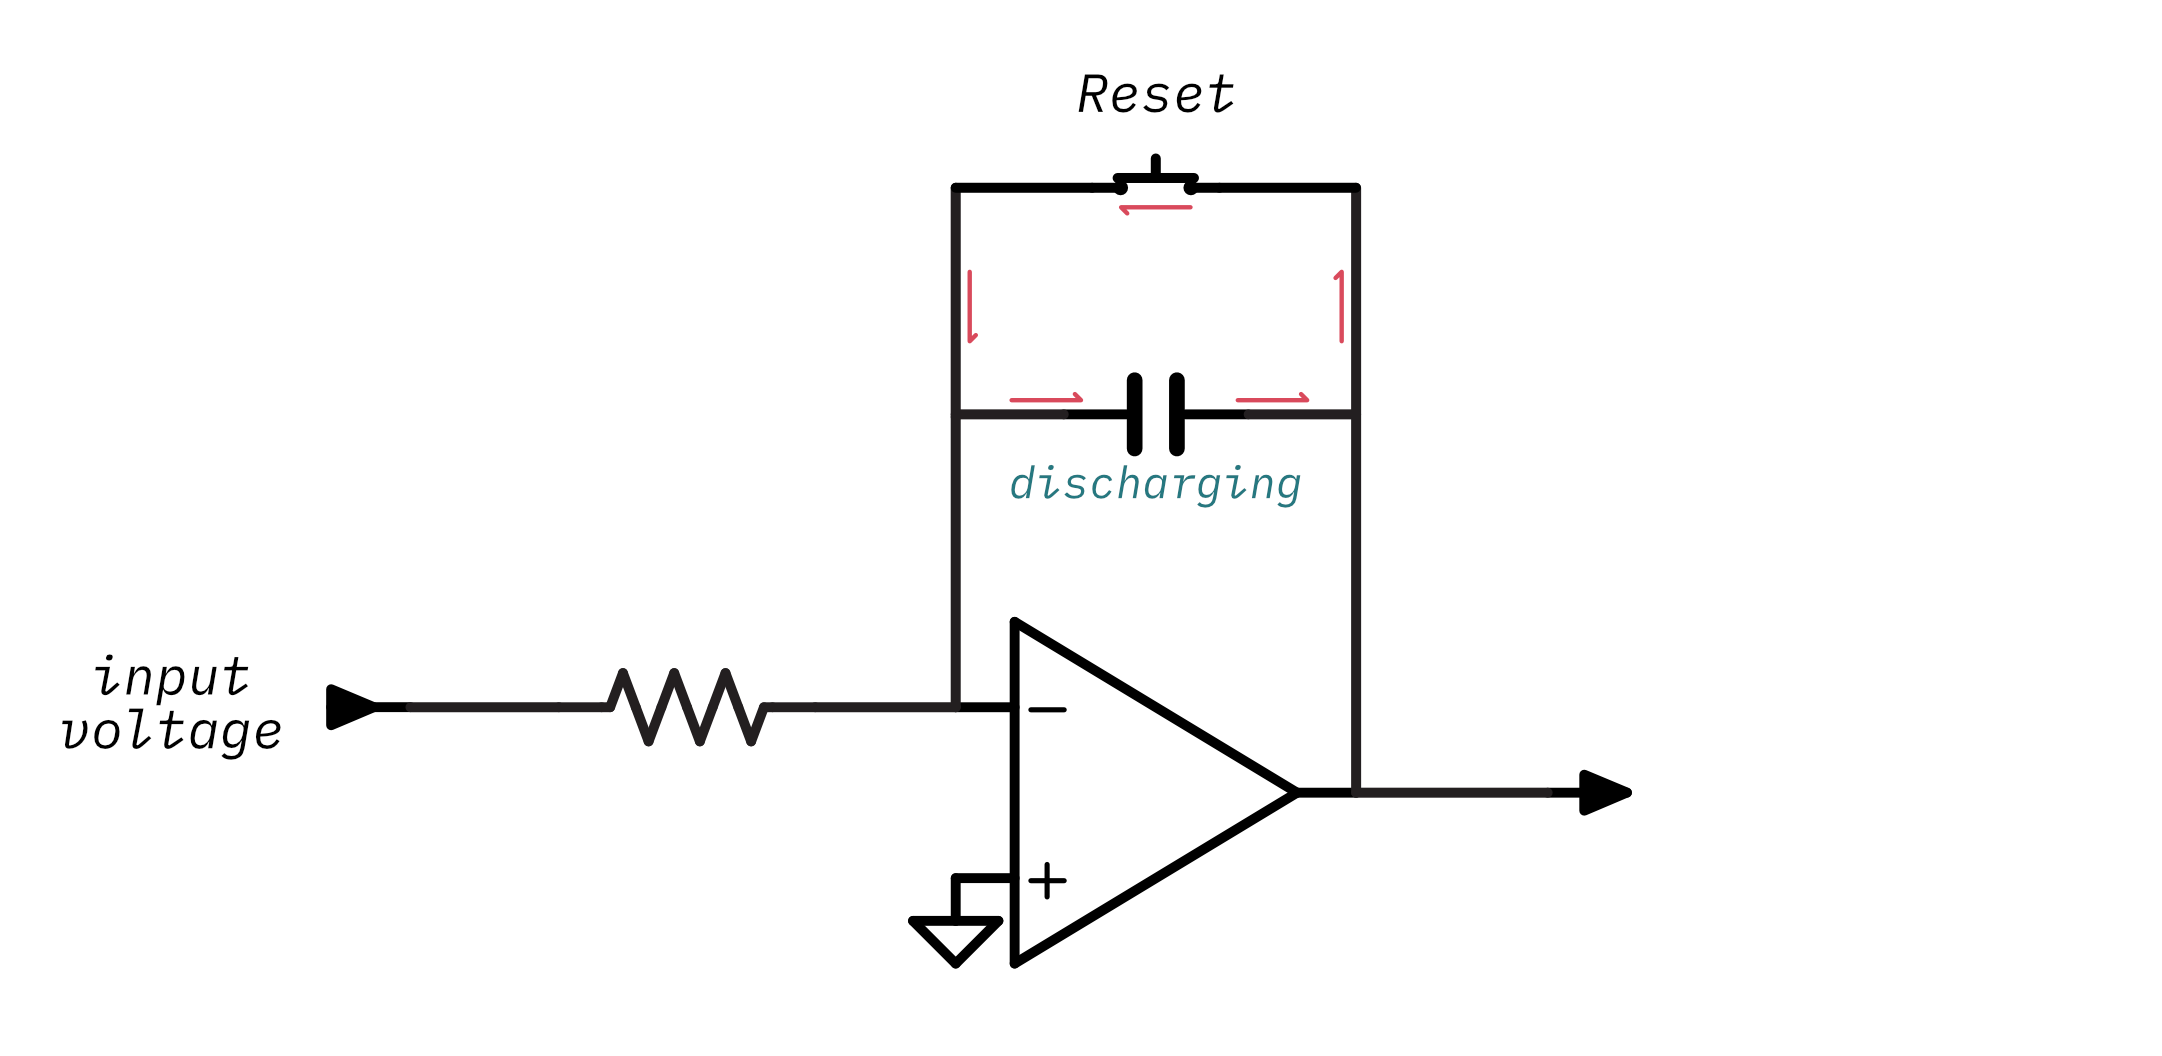 An op-amp integrator with a switch to discharge the capacitor